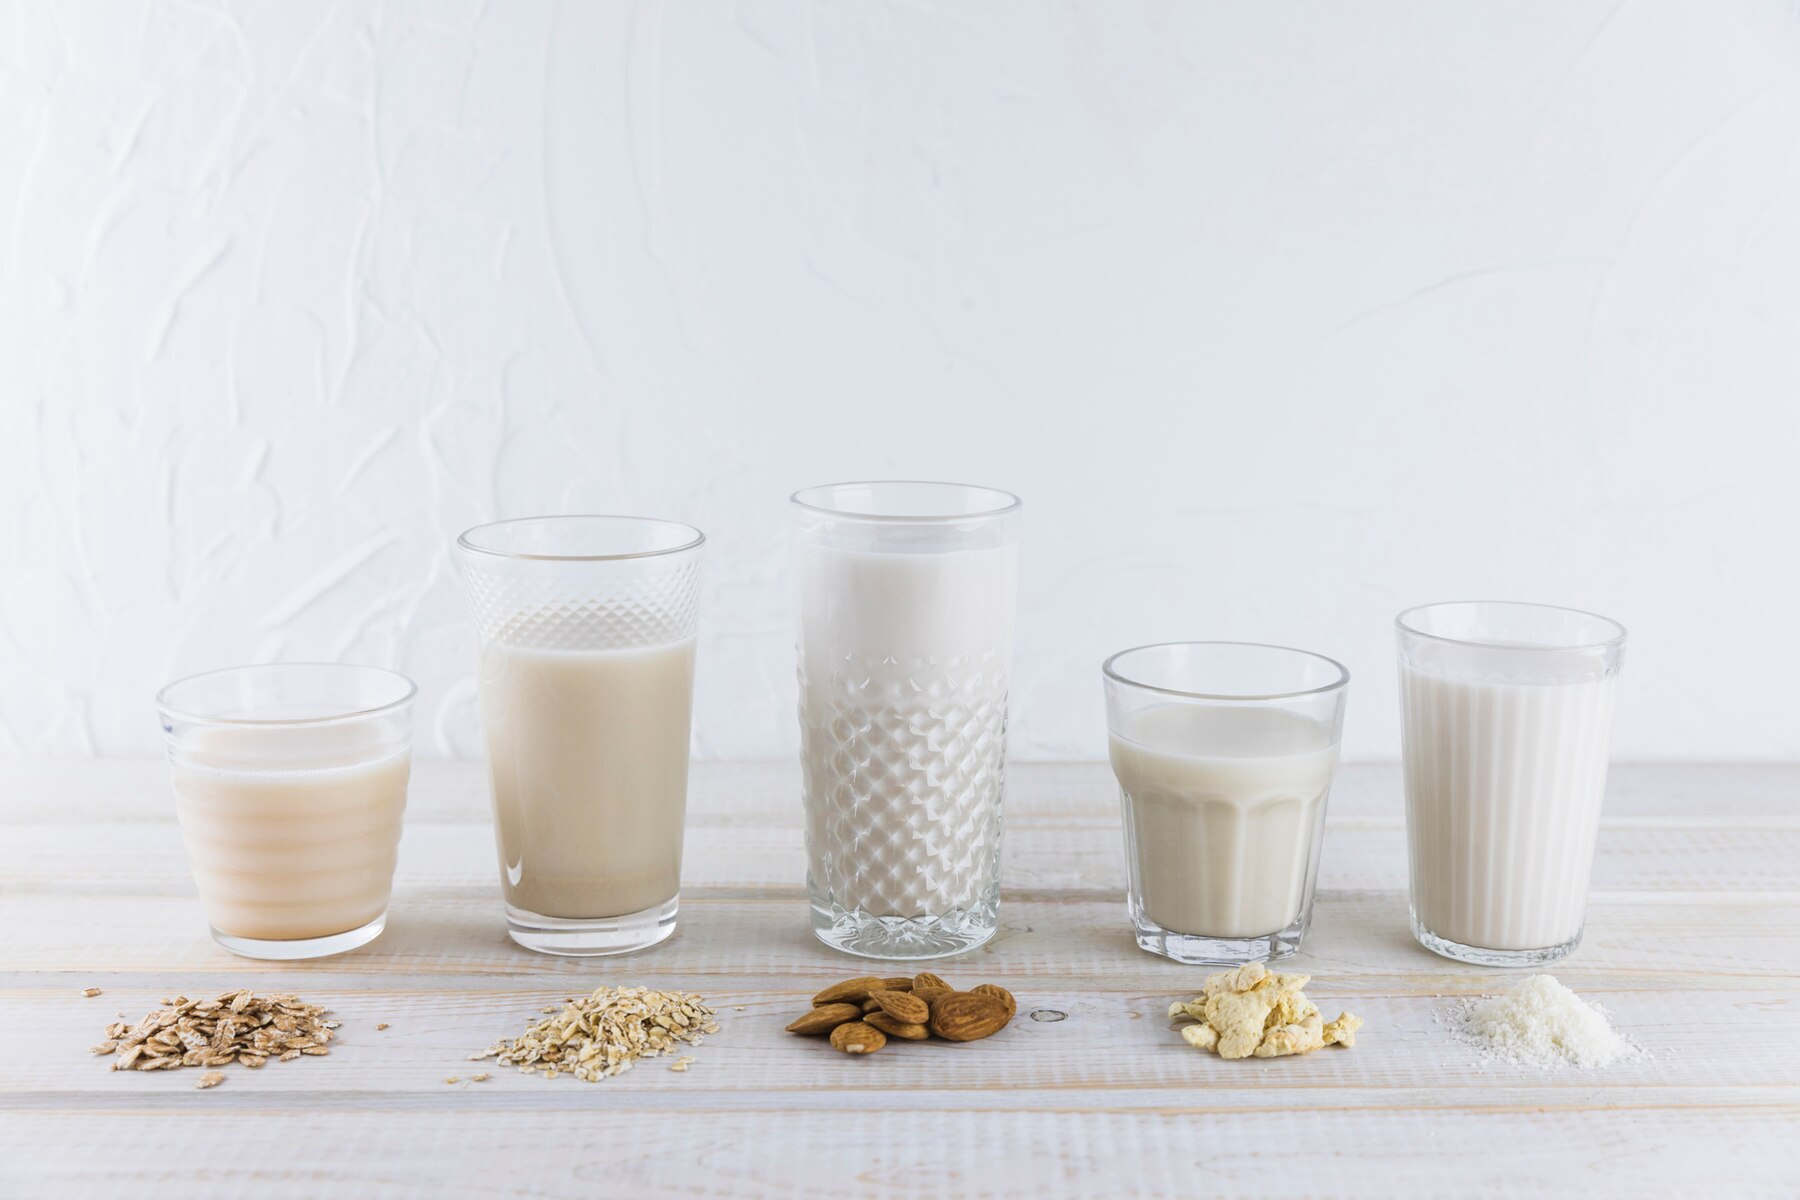 milk-in-different-types-of-glasses-and-cereals_23-2147987748.jpg